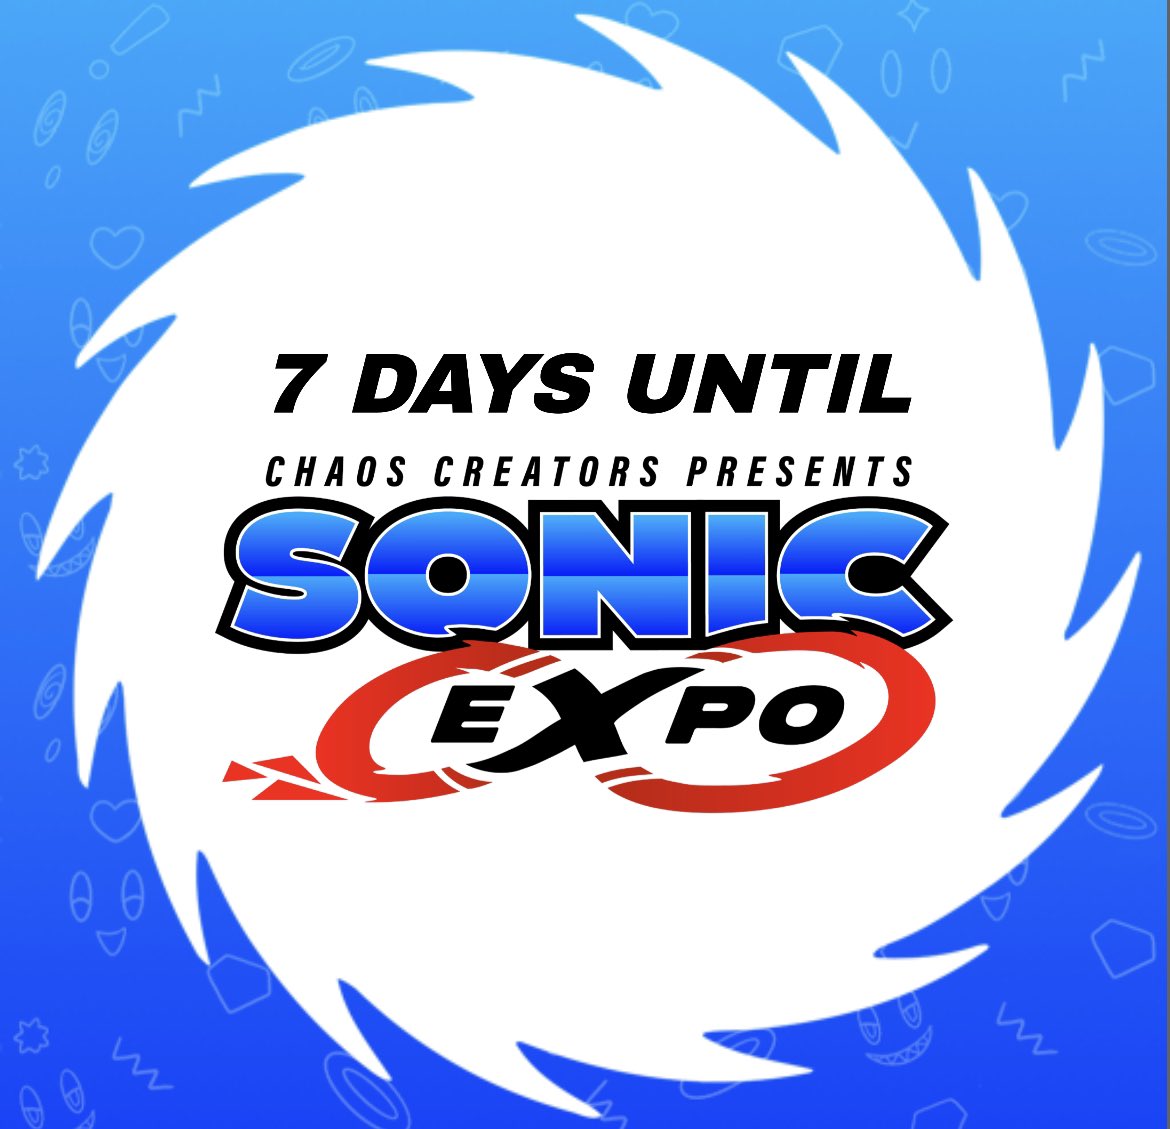 Sonic EXPO Atlanta on X: 🔔SCHEDULE ANNOUNCEMENT: The wait is finally  over! Here is our full schedule for Sonic & SEGA #FanJamREMIX! See ya  there! Which panel are you excited for? Stream